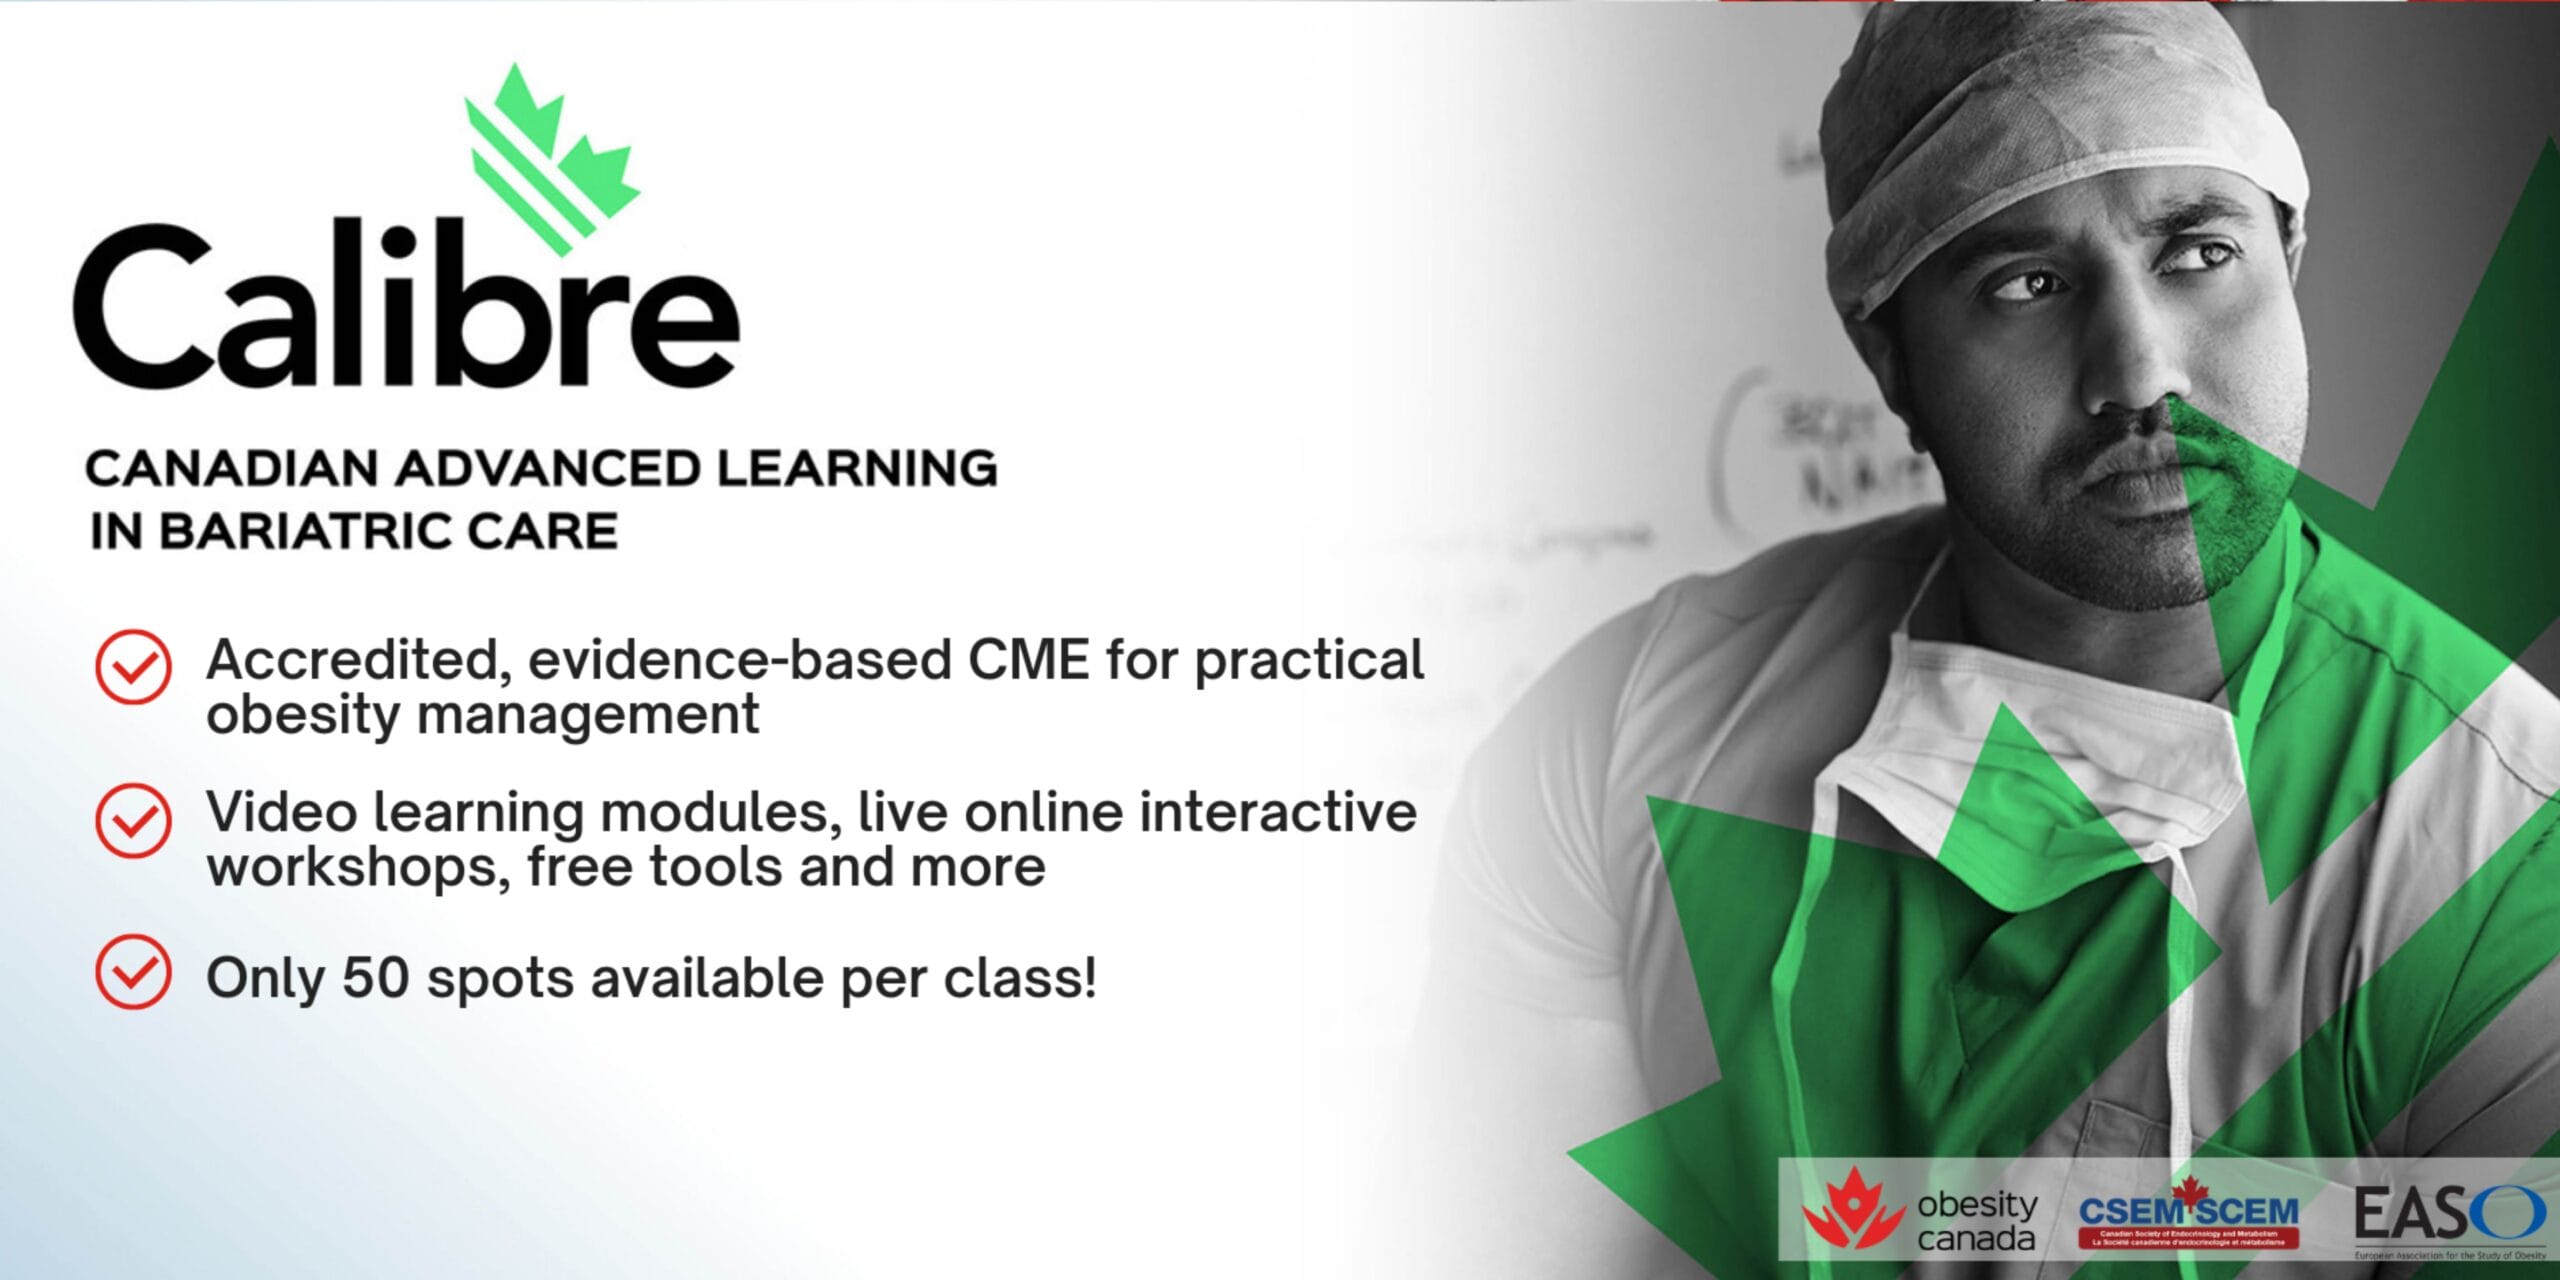 Advertisement for calibre, a canadian advanced learning program in bariatric care, featuring a serious male doctor in green scrubs and a stethoscope.